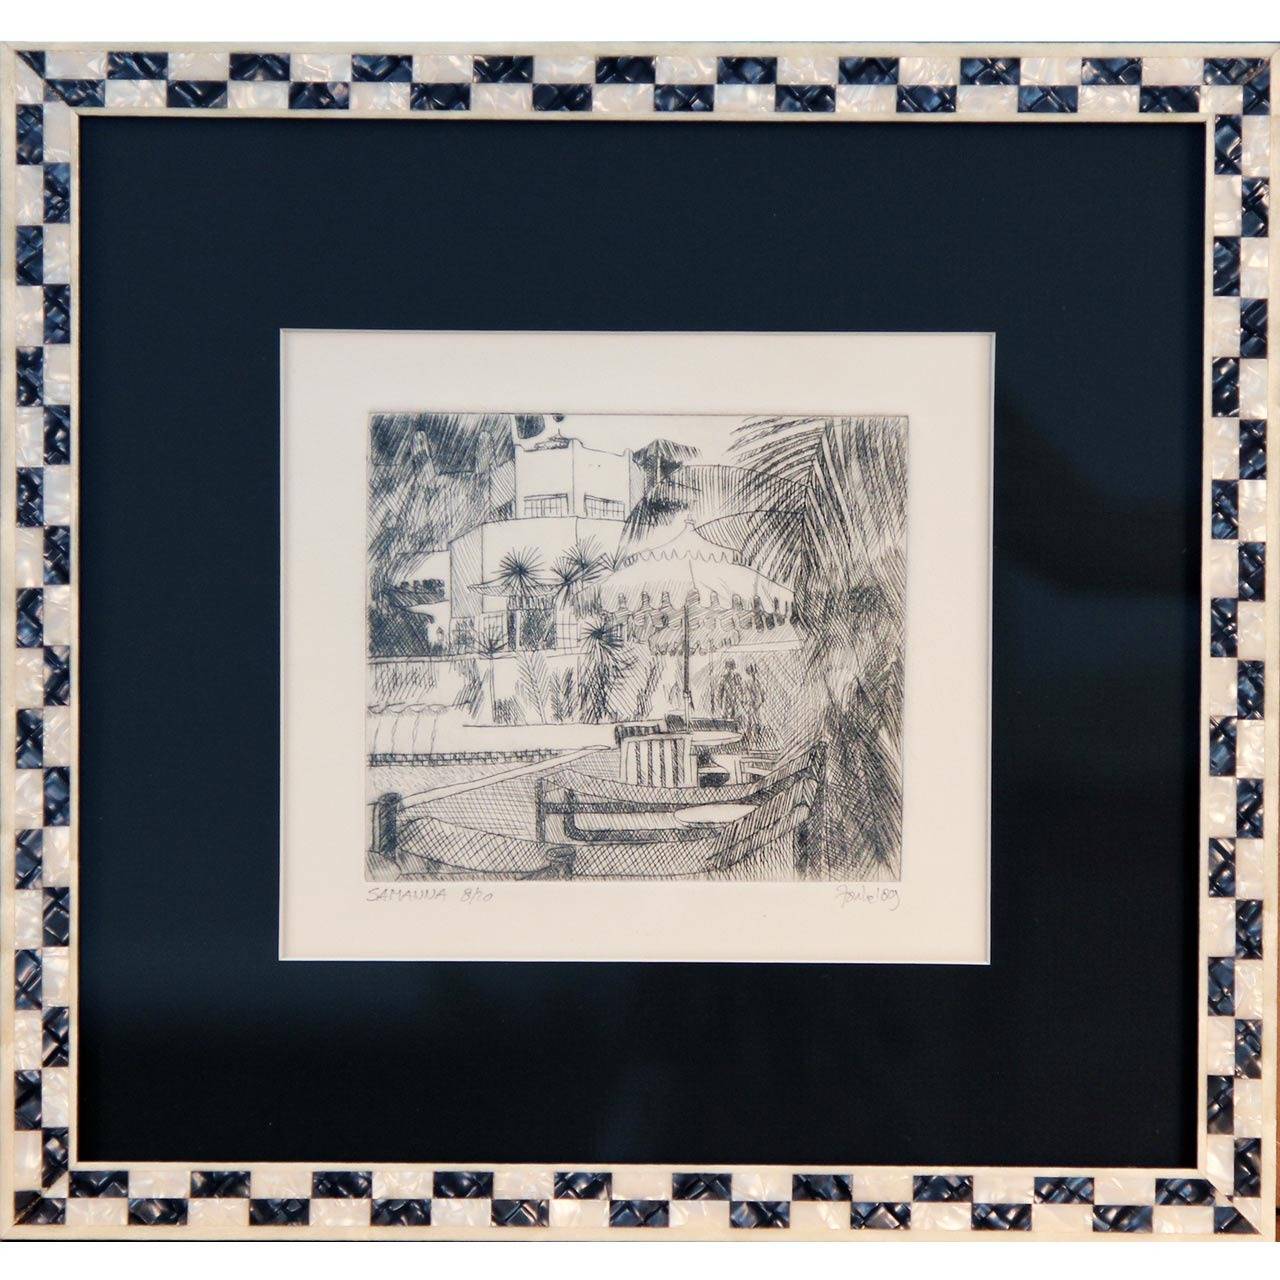 Pair of signed prints from a small edition based on original etchings of Belmond La Samanna, a famed hotel on the half-French, half-Dutch island of St. Martin (St. Maarten) in the French West Indies. The resort is renowned for its Mediterranean